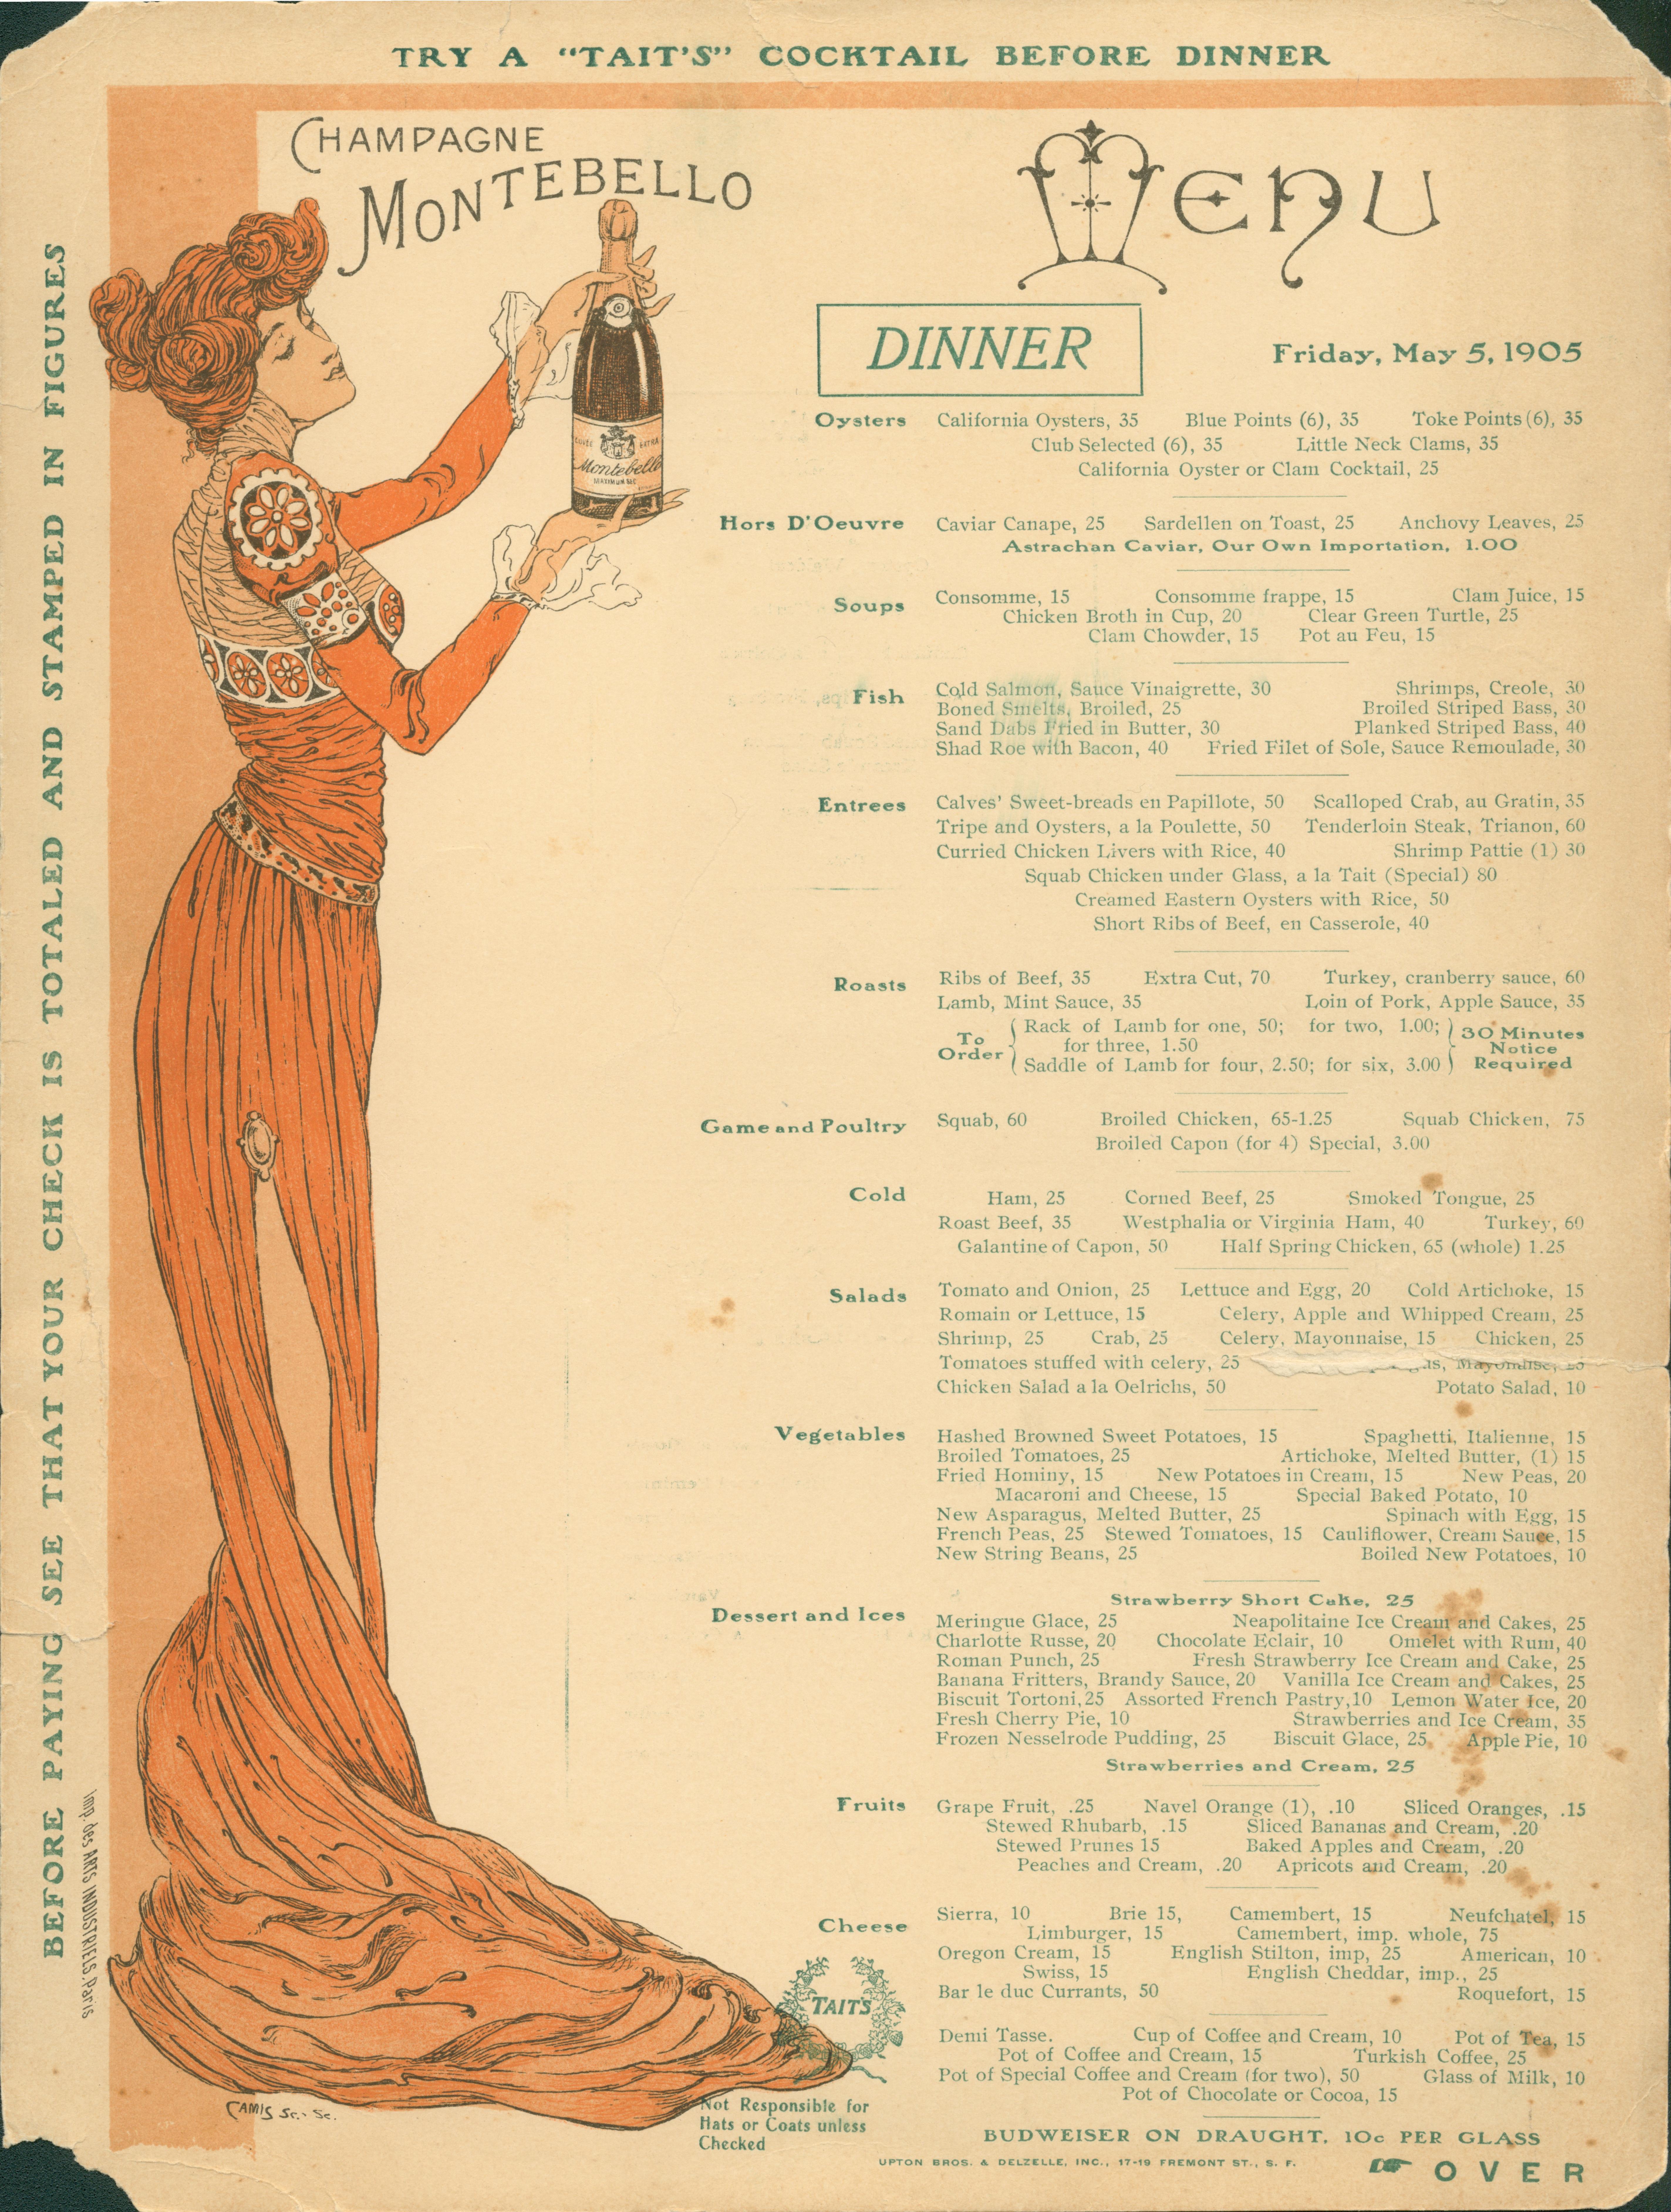 Illustrated with an image of a woman holding a bottle of champagne.